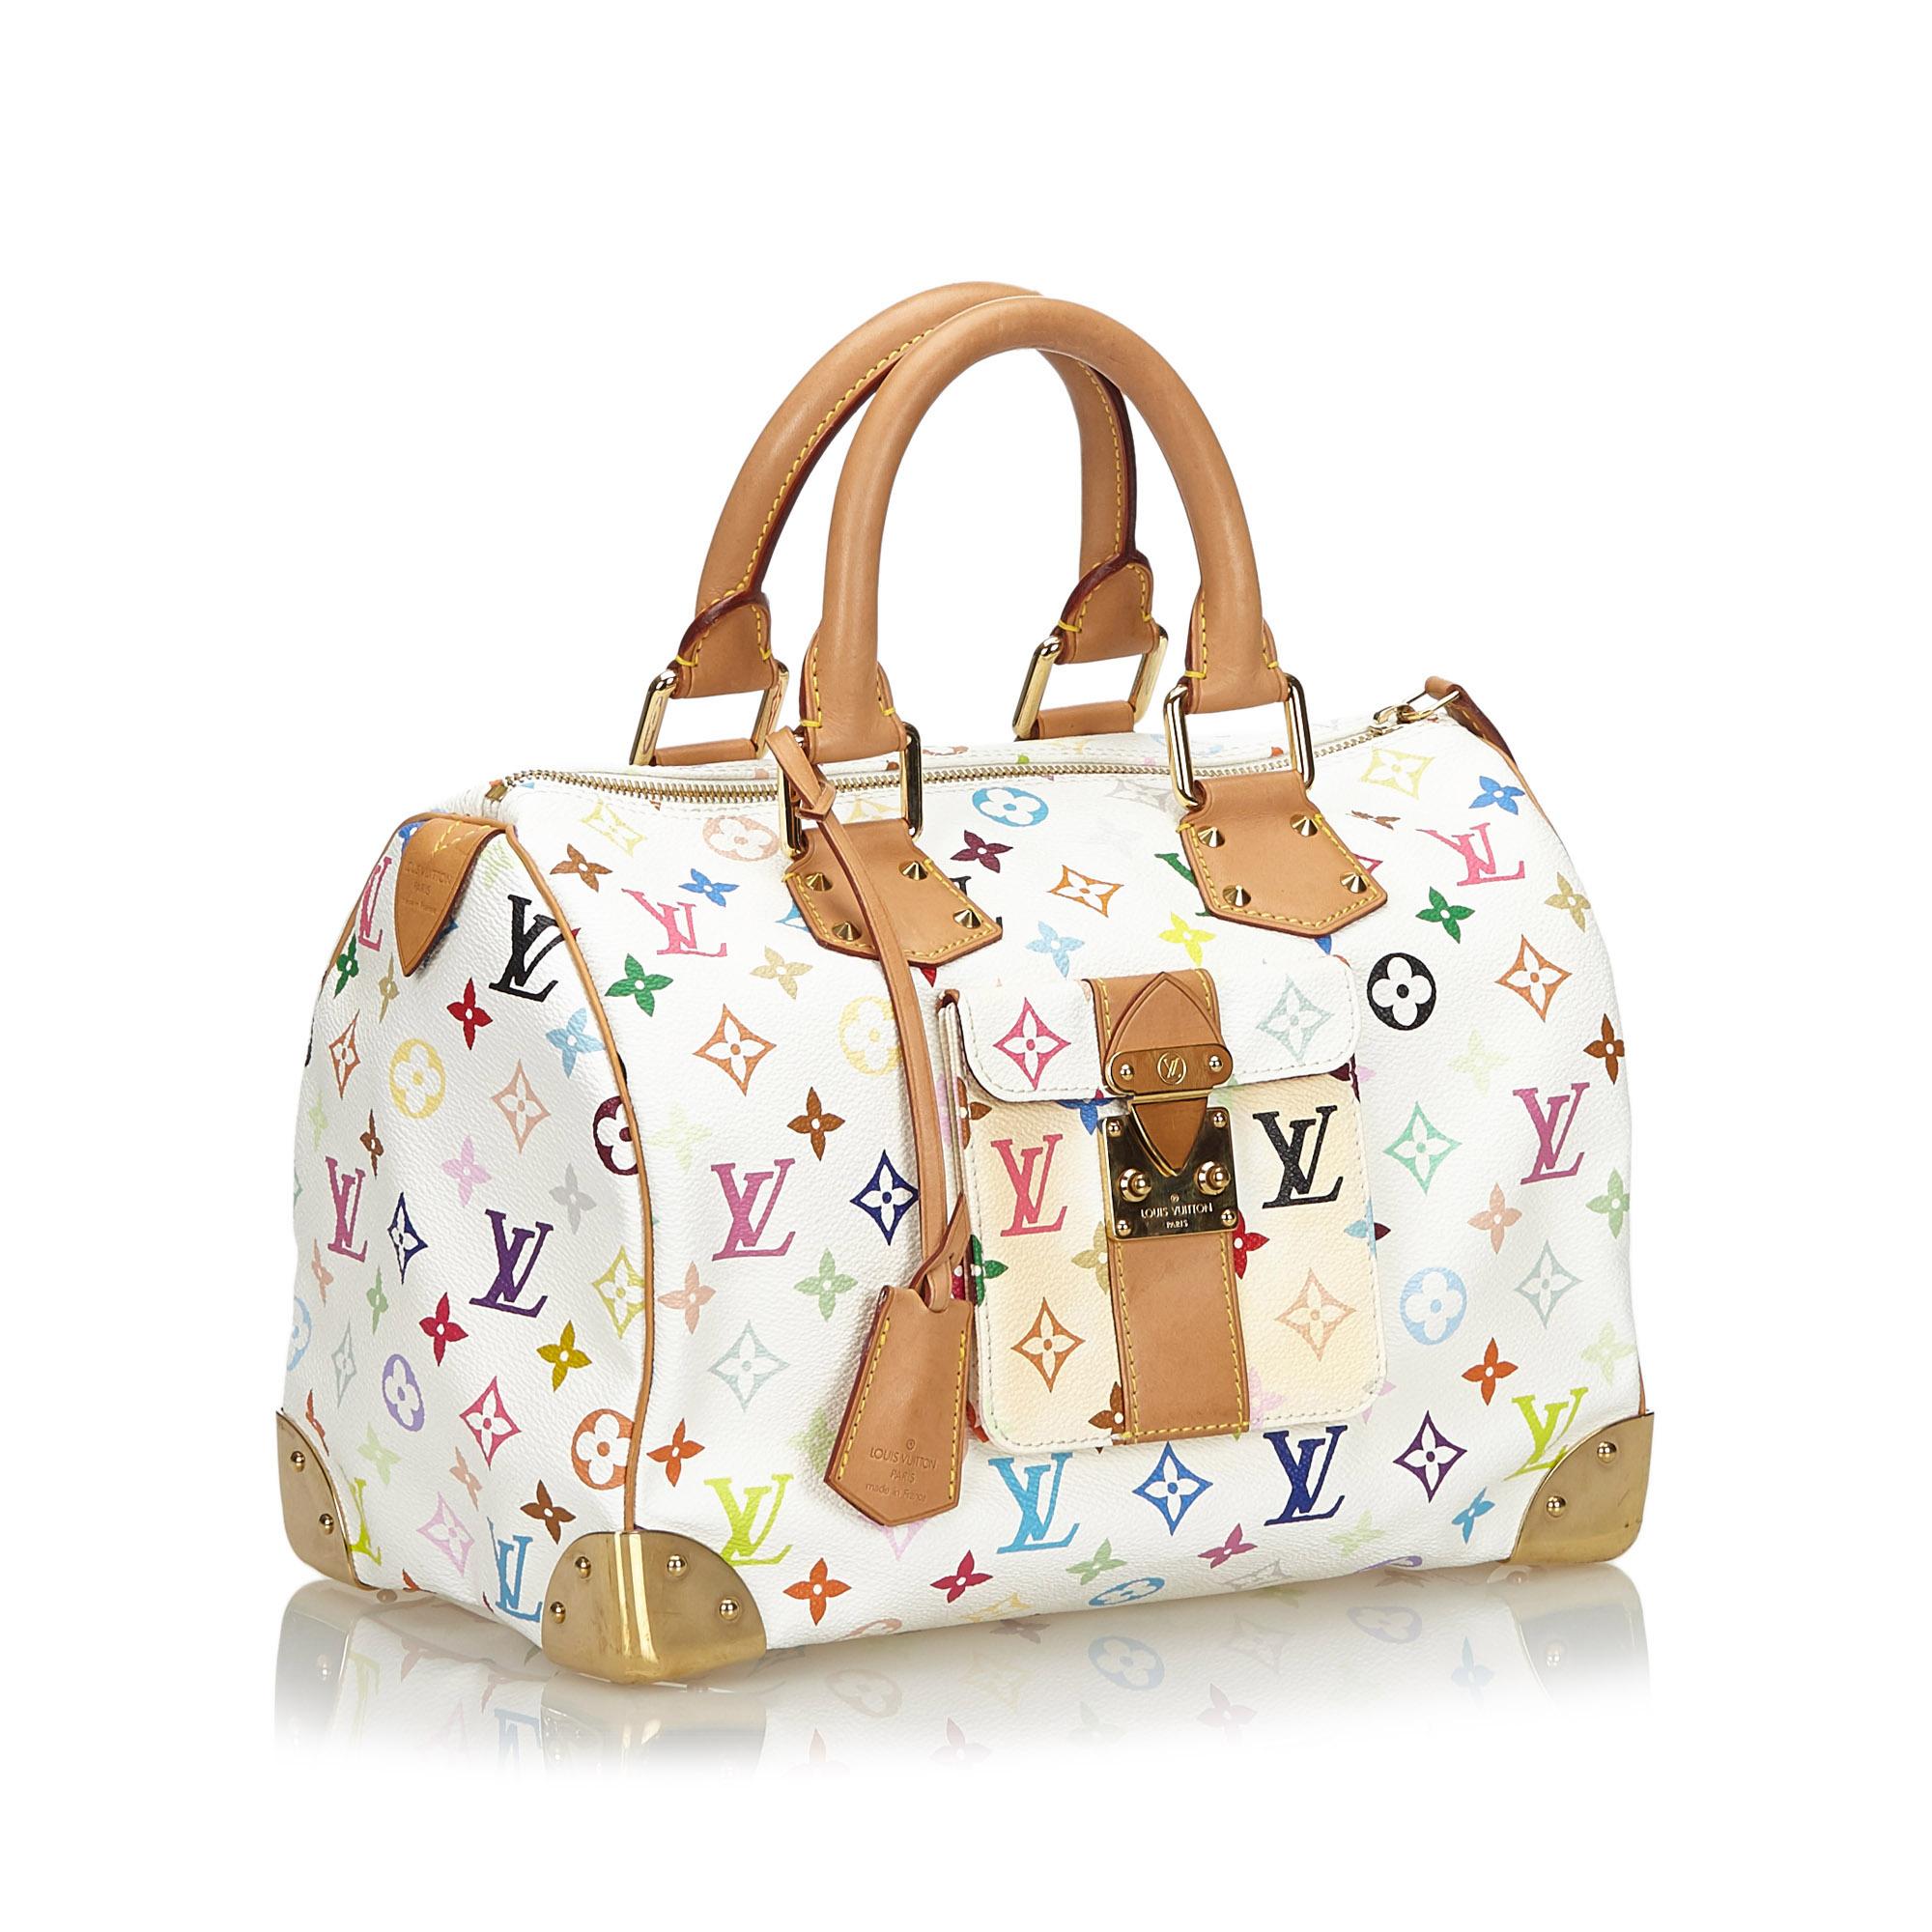 The Speedy 30 features the Monogram Multicolore canvas with vachetta trim, an exterior flap pocket with a stud closure, rolled vachetta handles, a top zip closure, and an interior slip pocket. It carries as B+ condition rating.

Inclusions: 
Dust